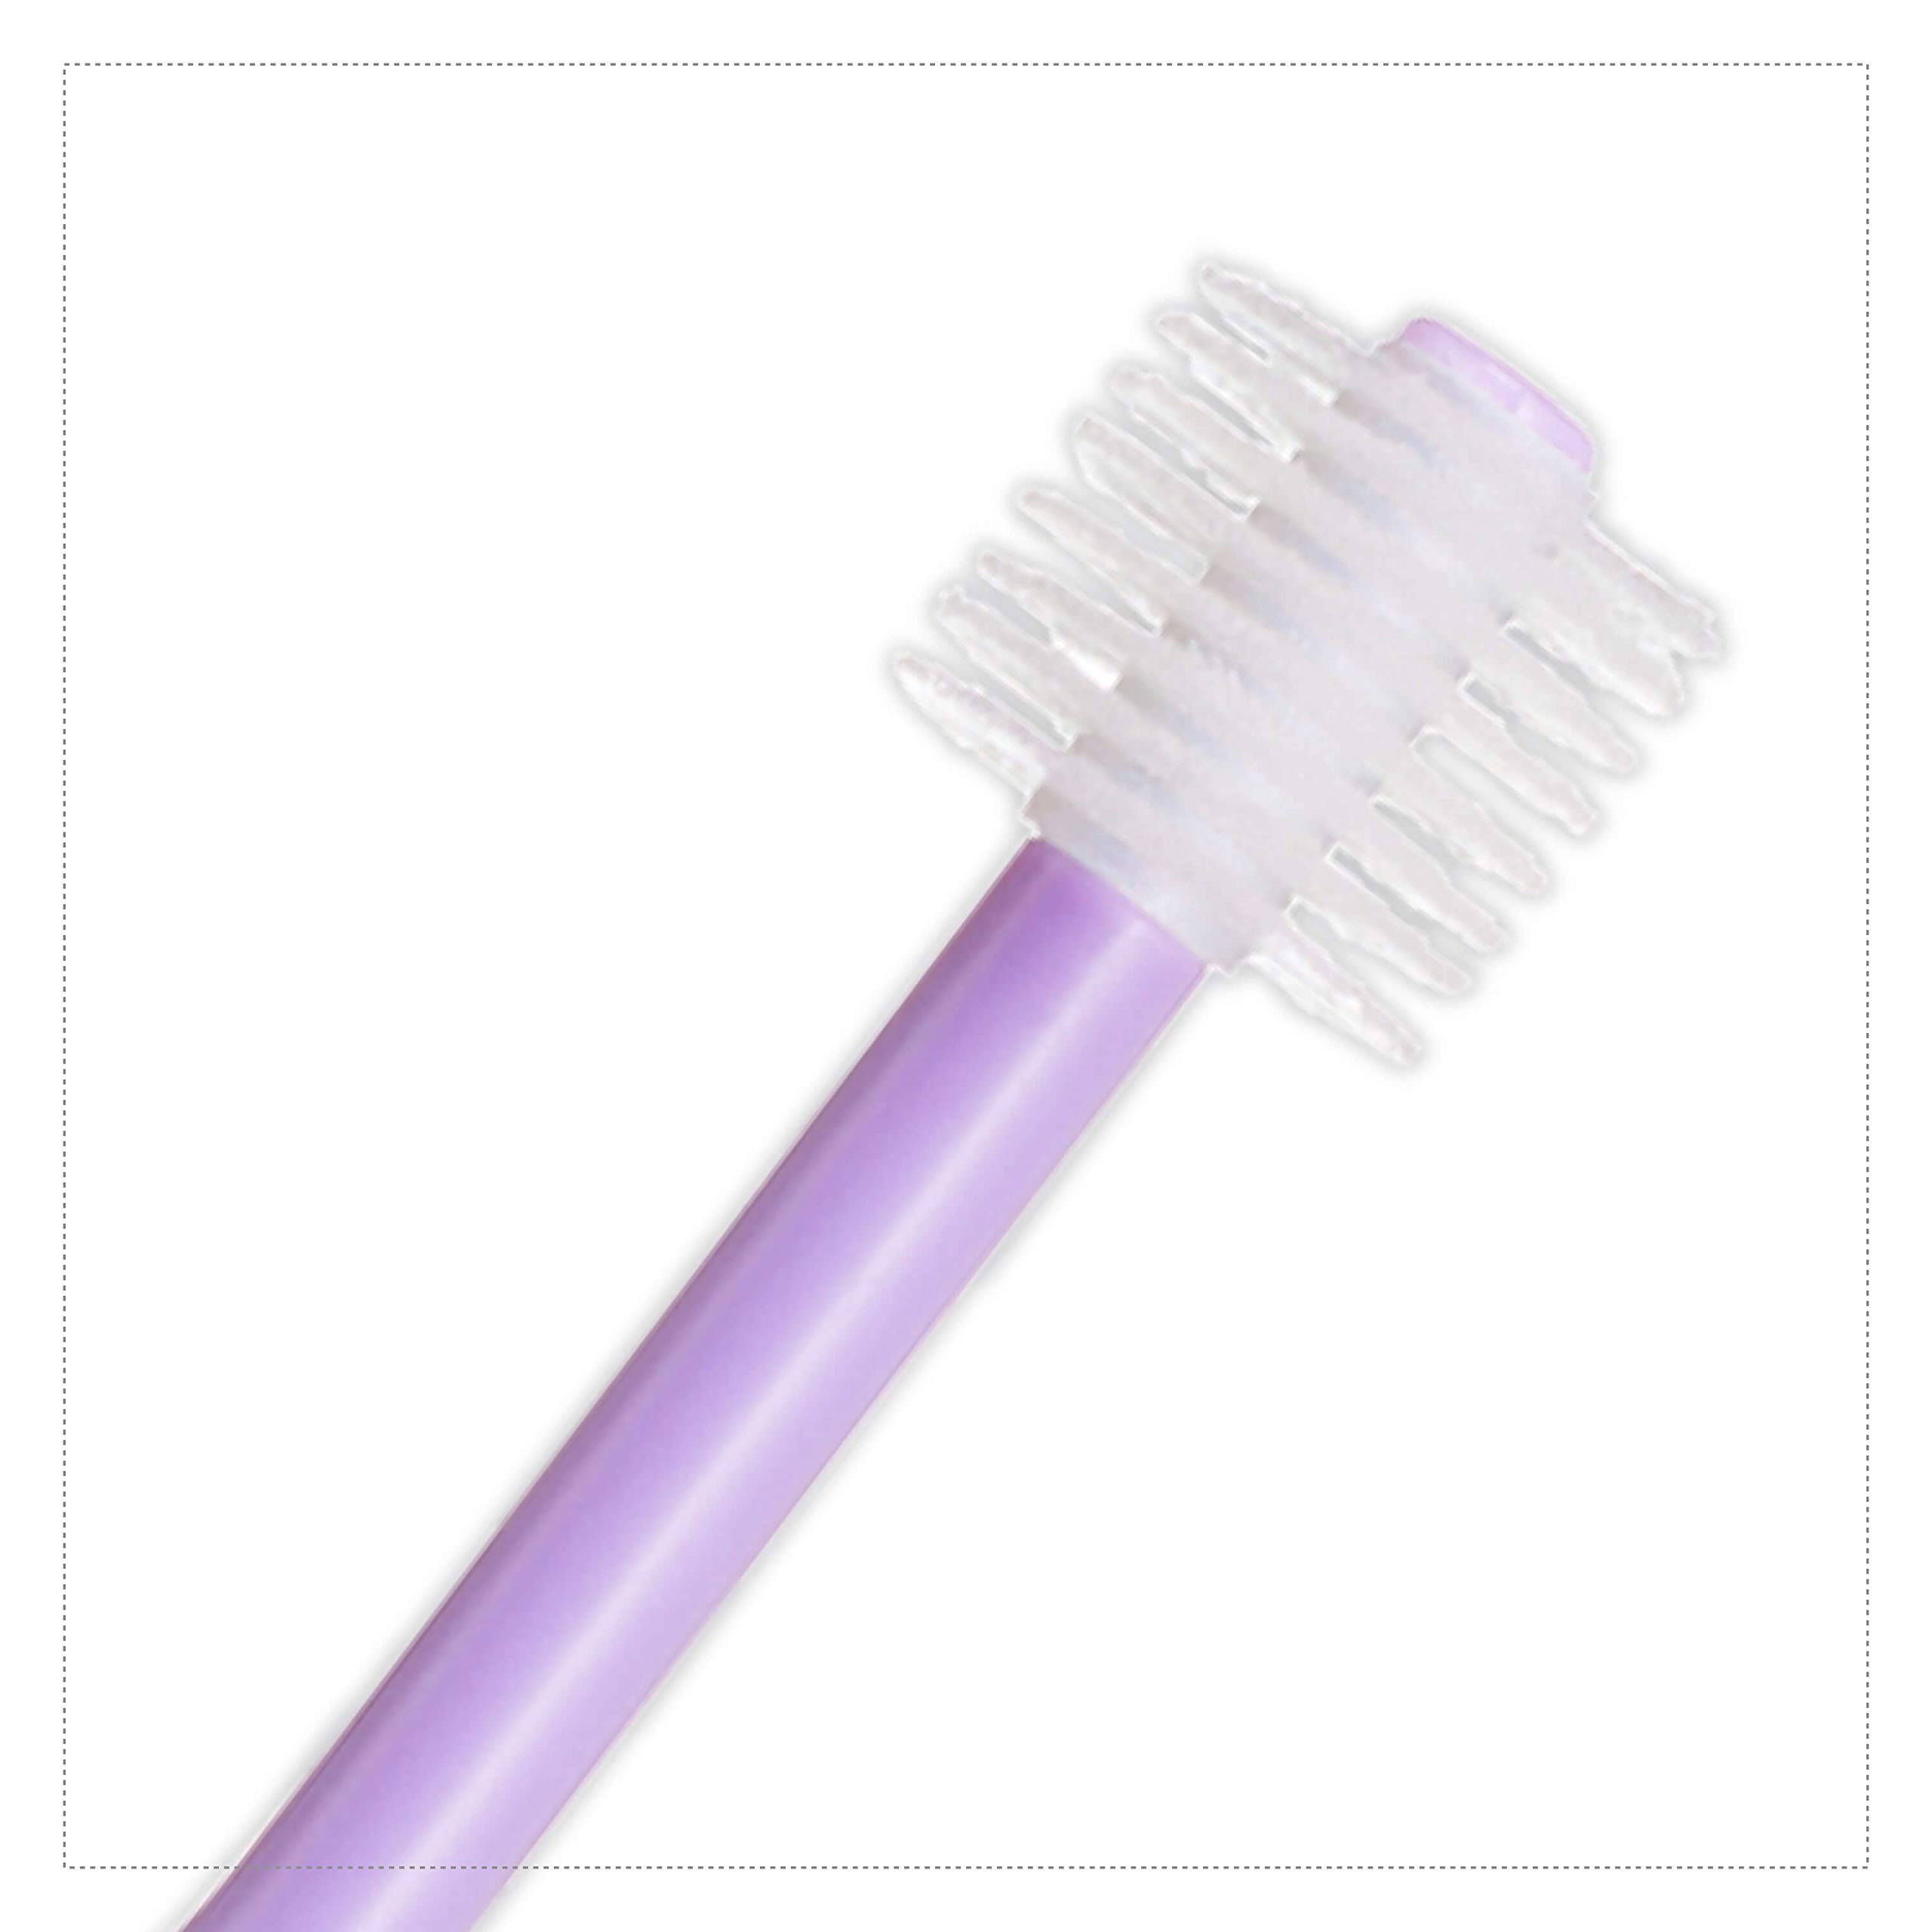 Brilliant Child Toothbrush - For Kids Ages 2-5 Years, Round Brush Head, 1 Count, Lilac